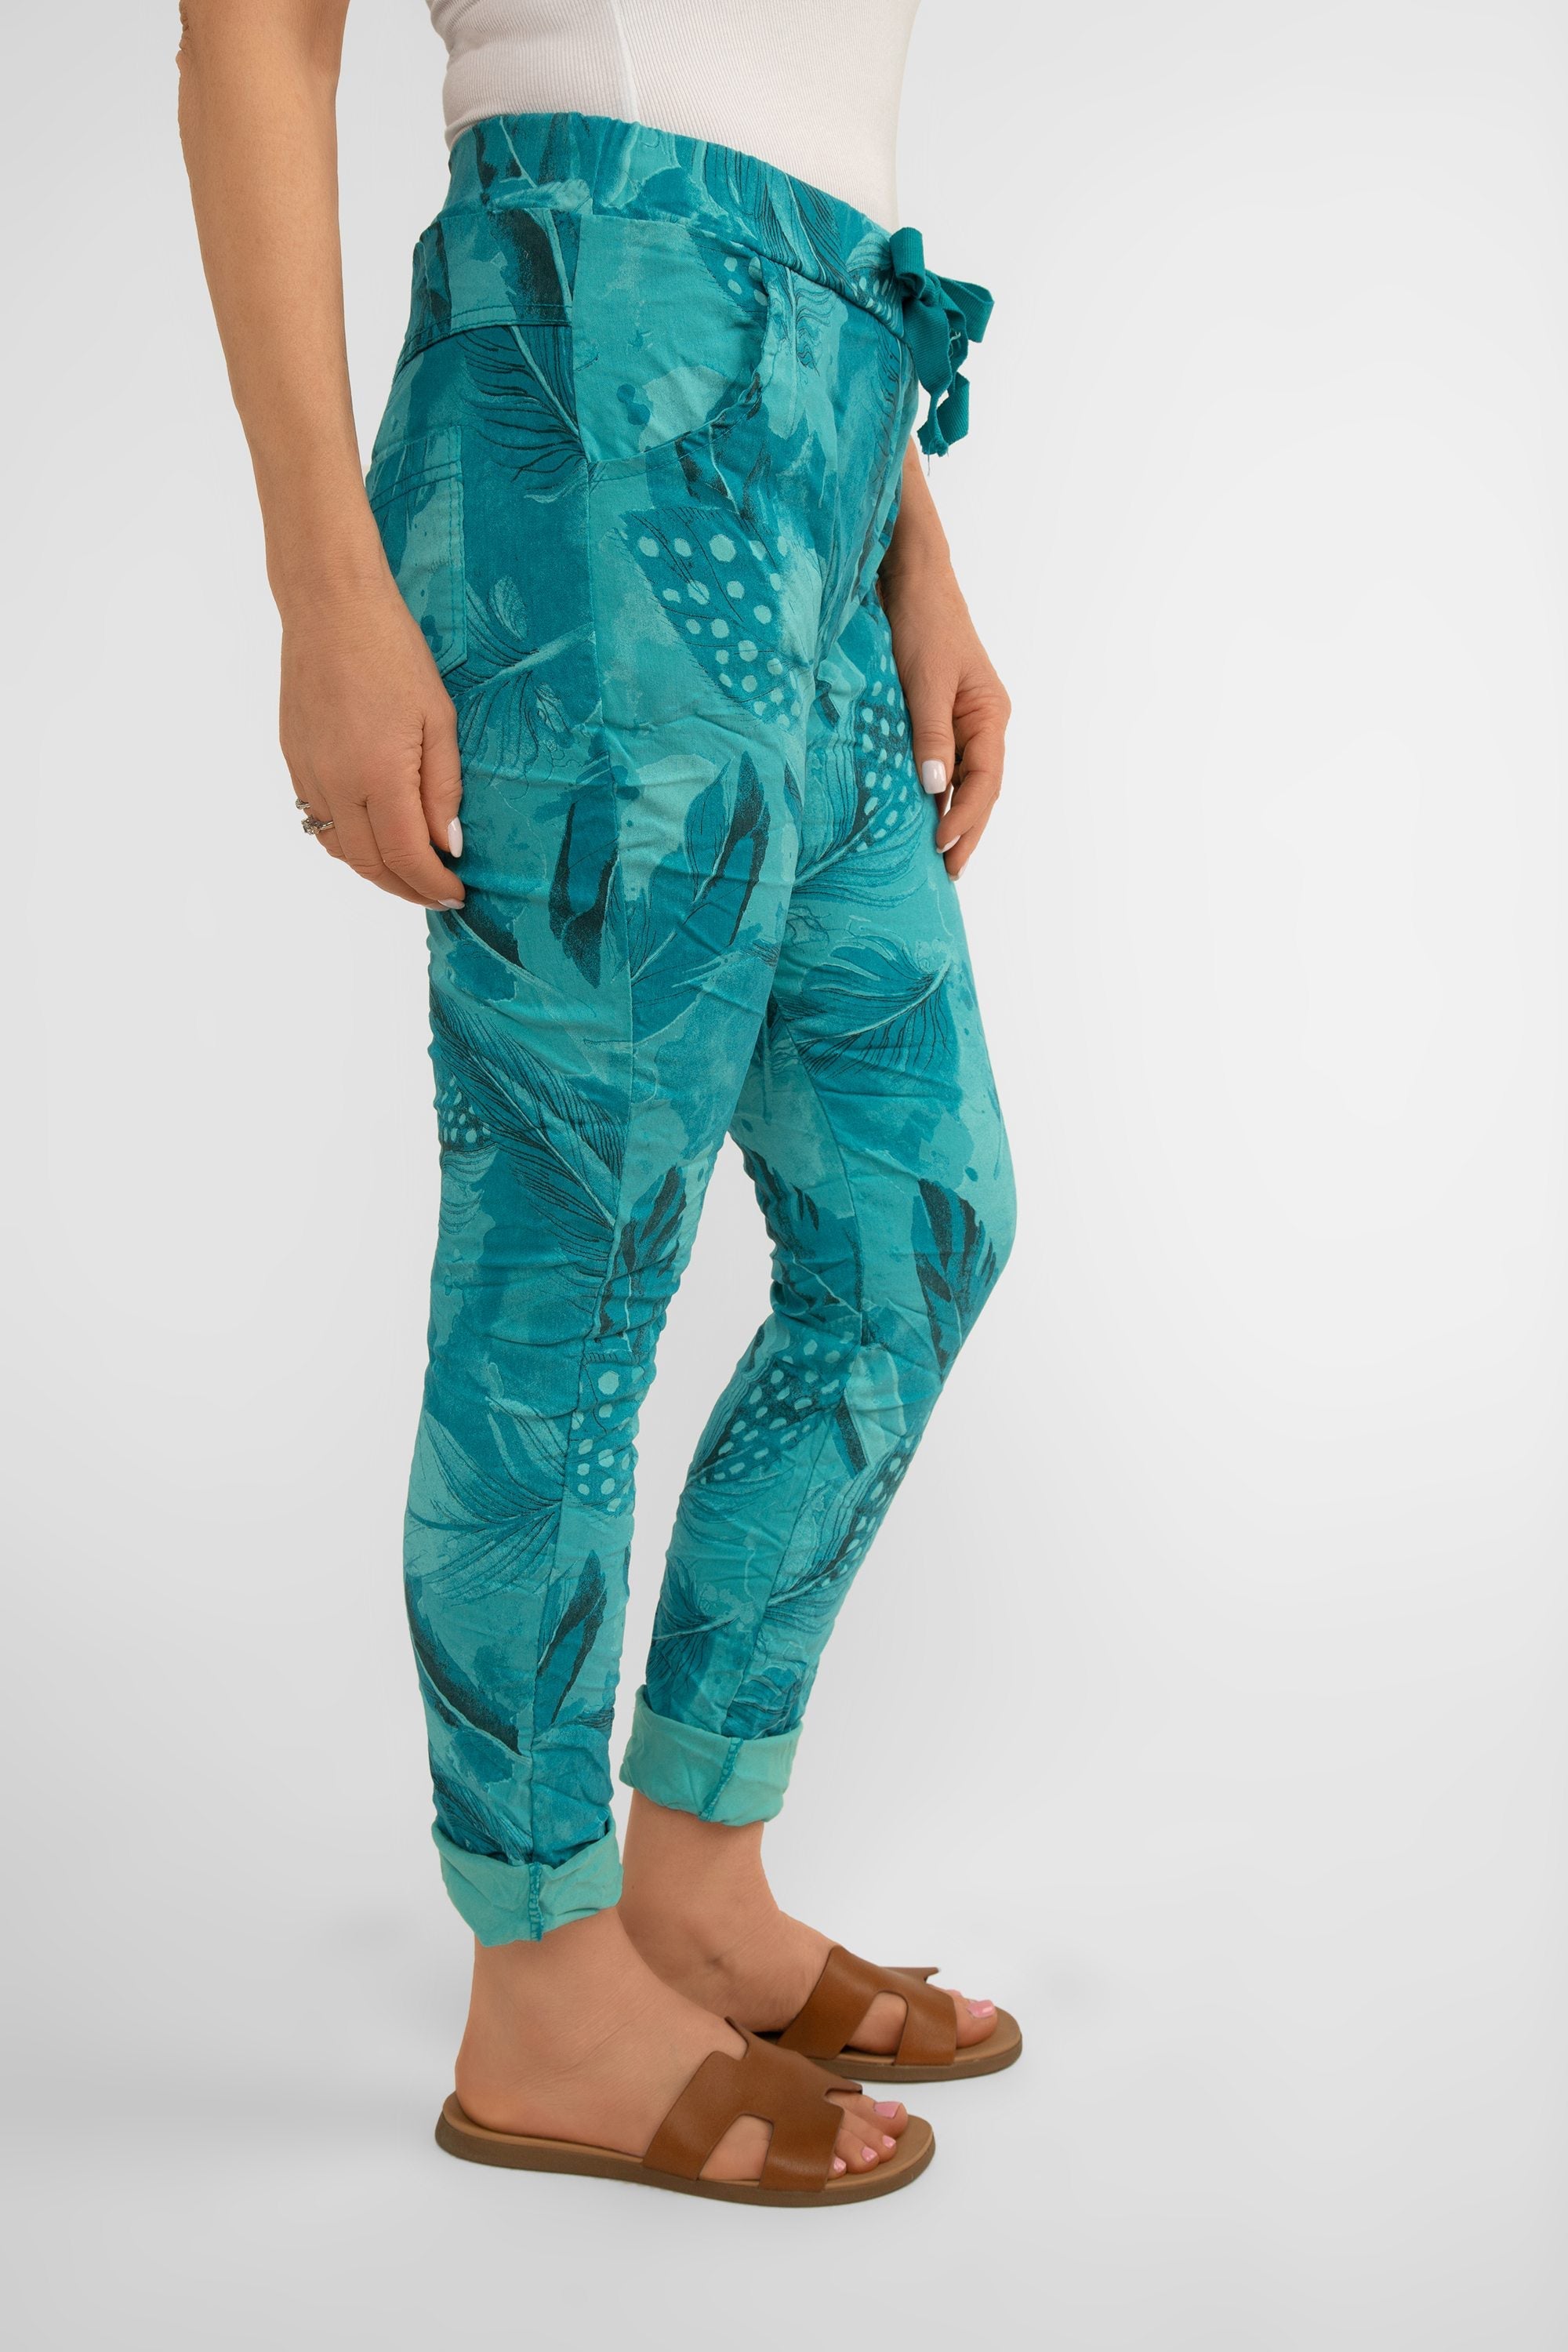 Side view of Bella Amore (21144) Women's Slim Fit Cropped Crinkle Pants with Side Pockets, Pull-on waist in Teal Feather Print